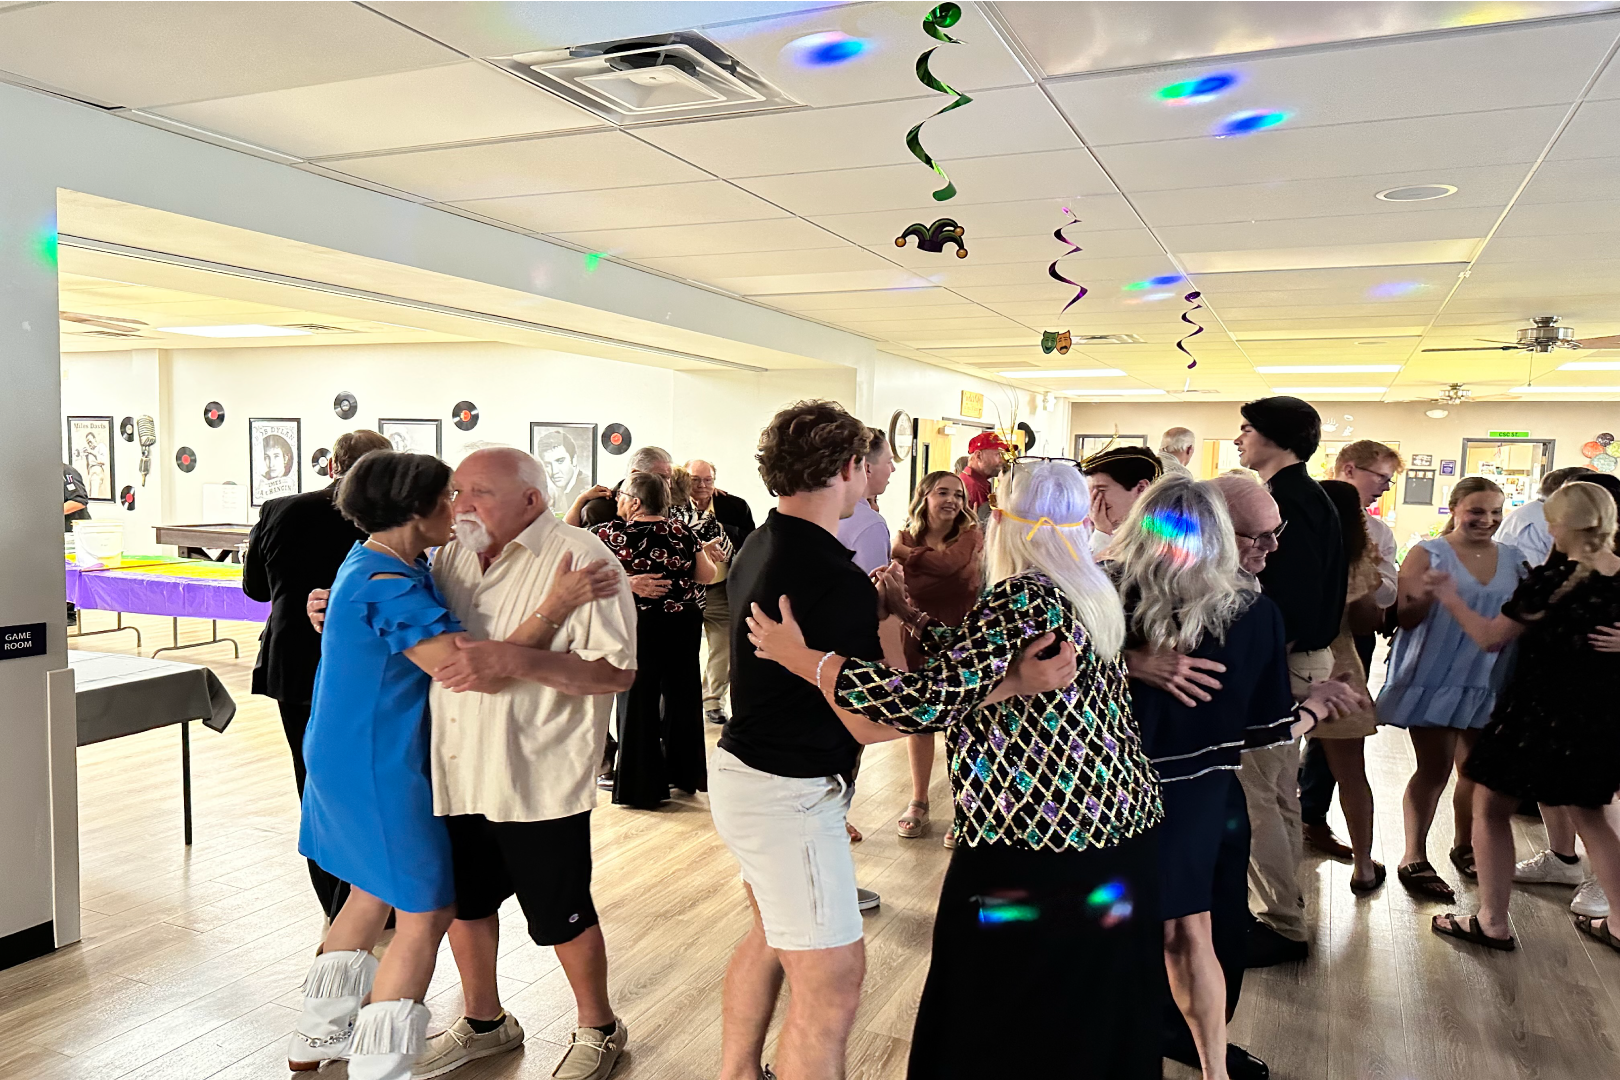 Group of men and women dancing at the Senior Center